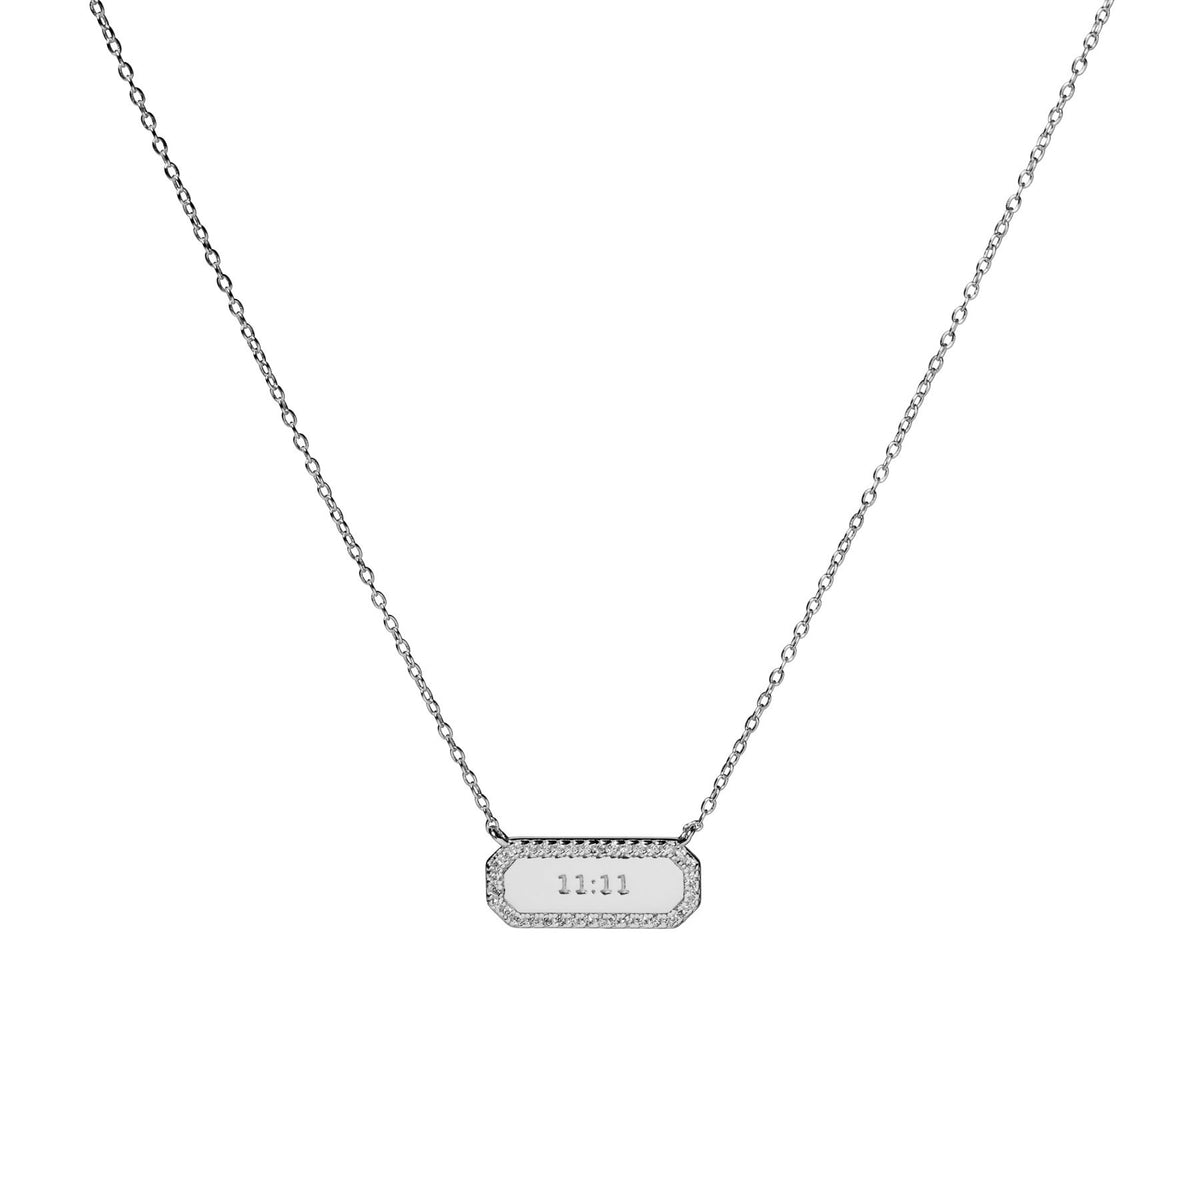 11:11 Personalized Necklace